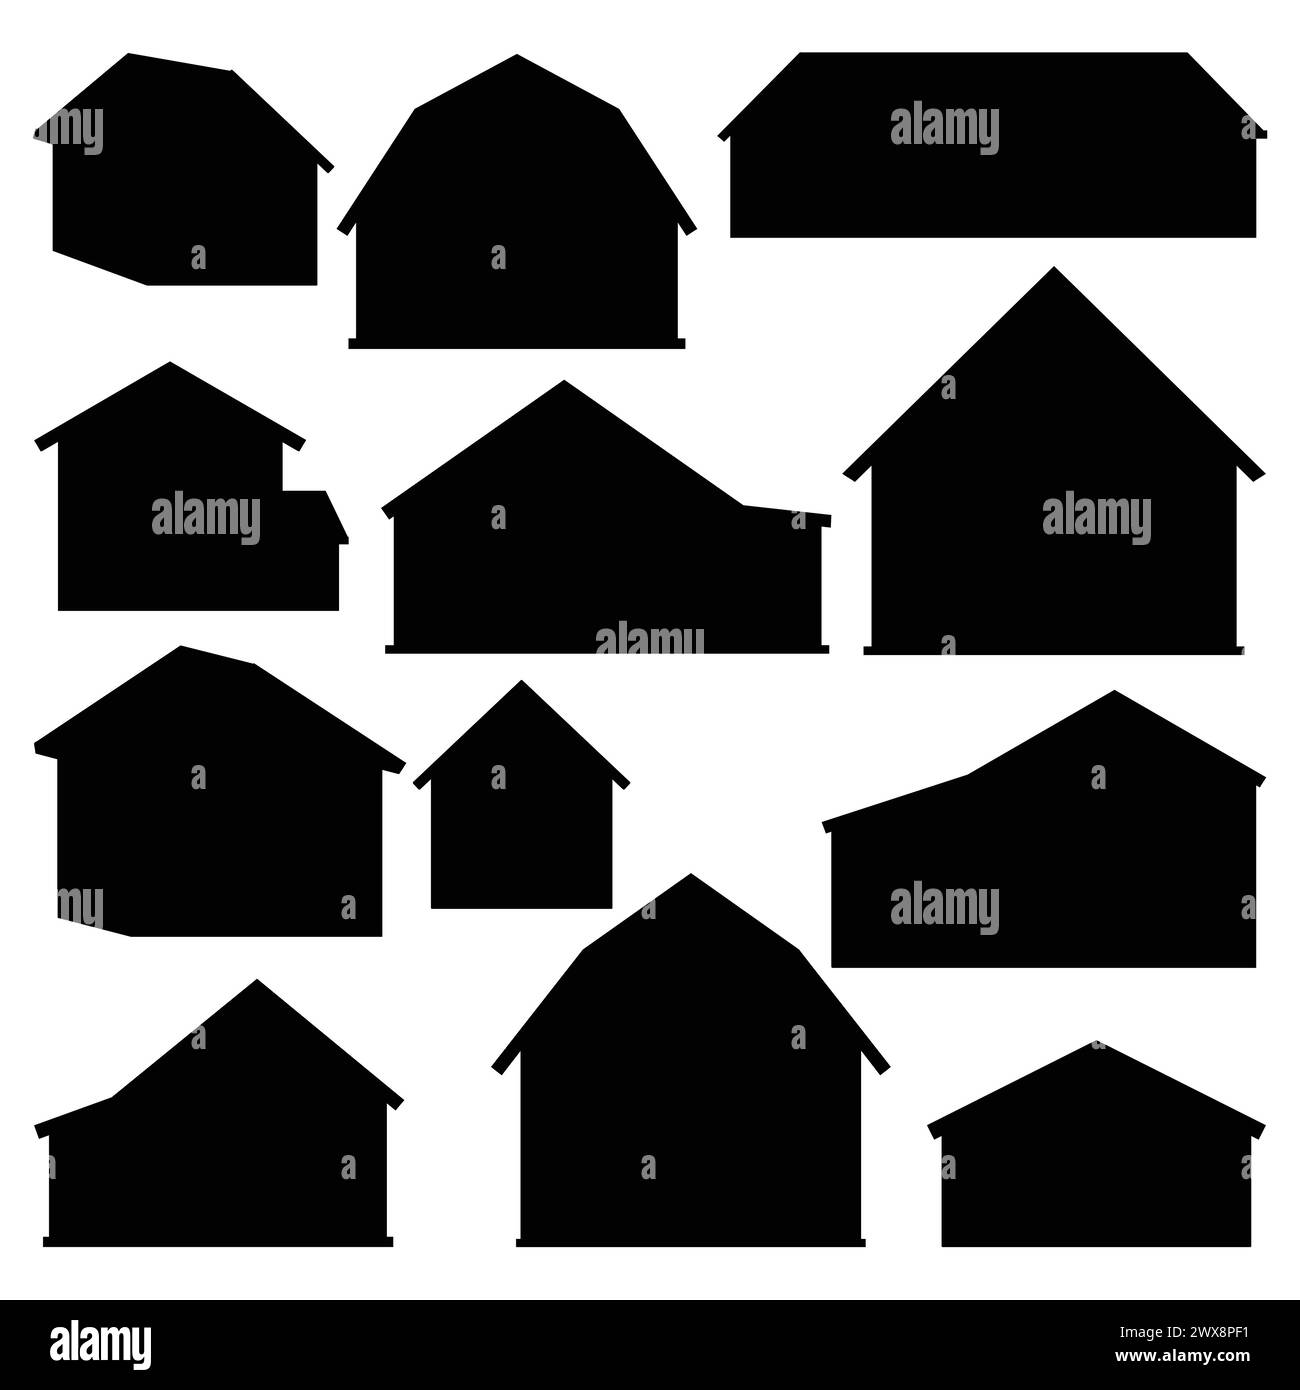 Big black barn silhouette set. Different farm houses or barns. Vector collection of illustration of wooden hand drawn buildings Stock Vector